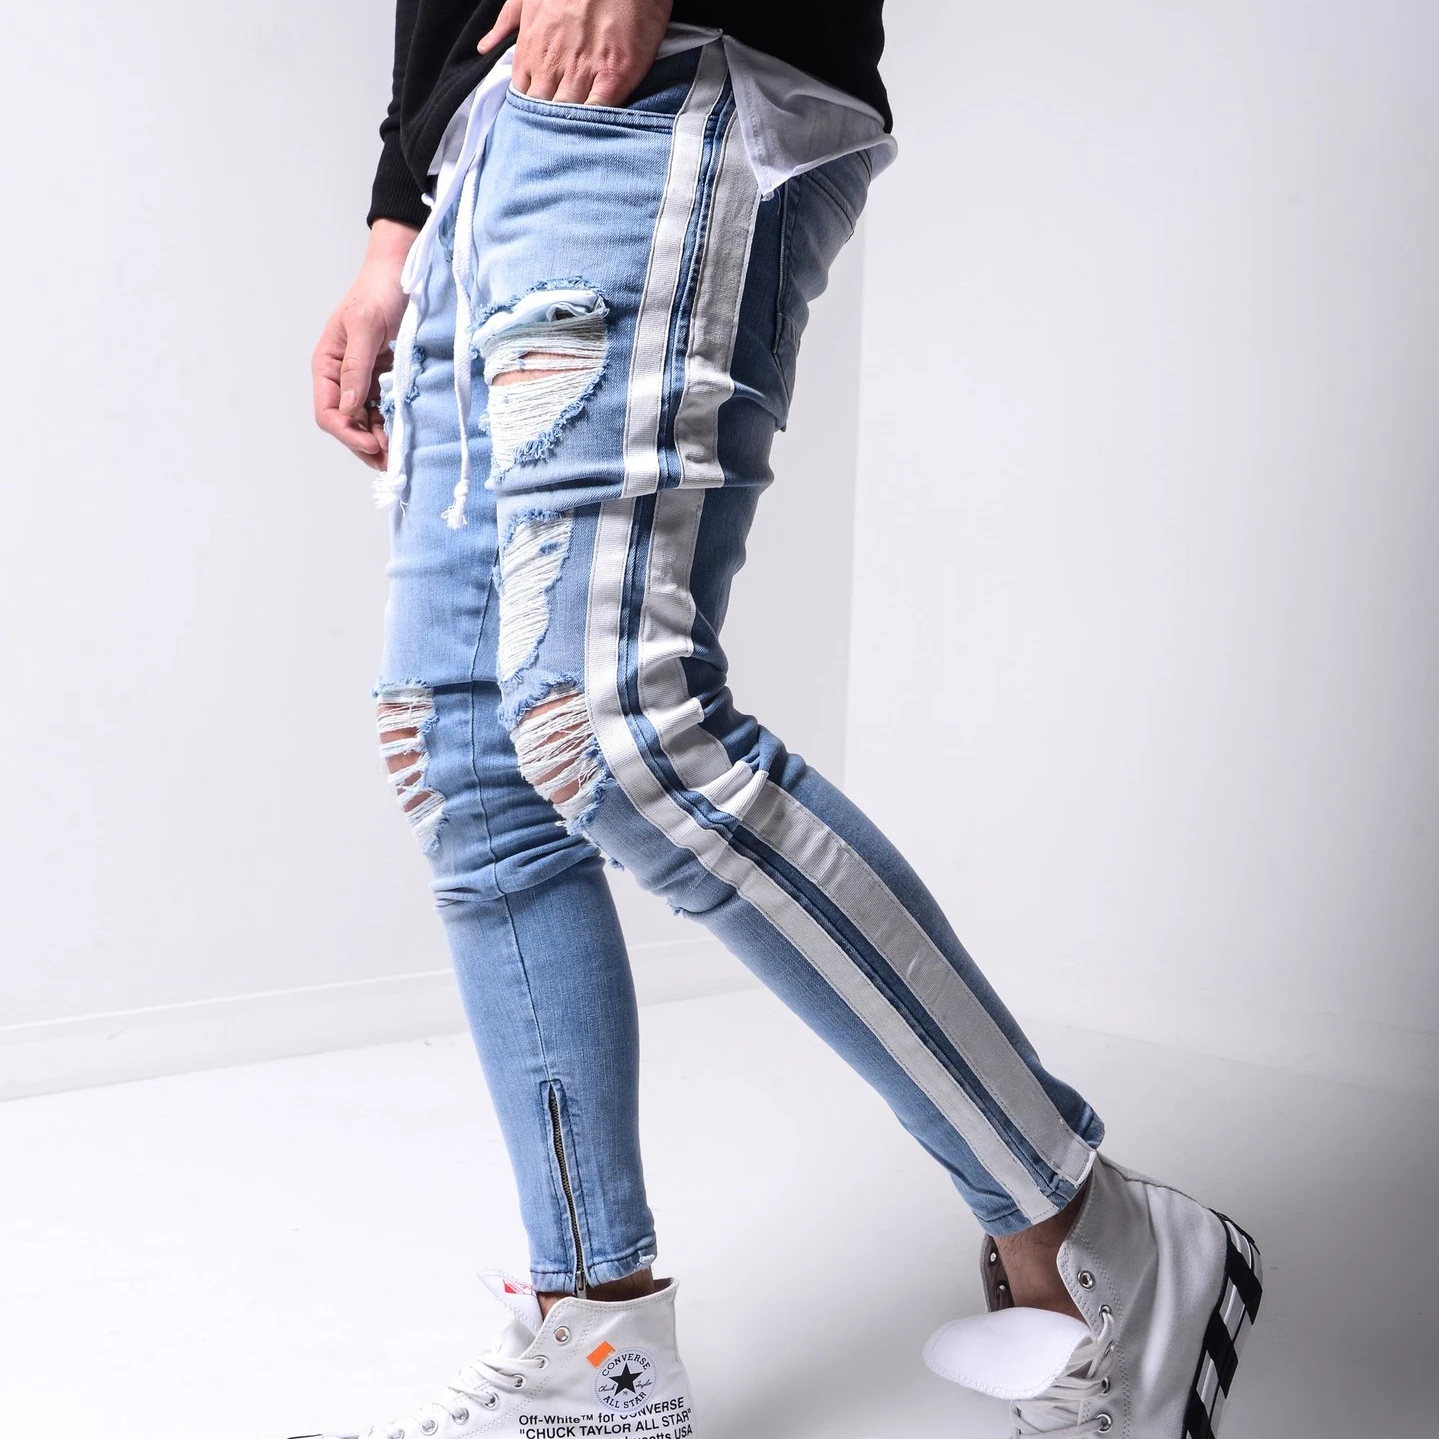 

YD - 1970 Wholesale street fashion 2021 mens ripped skinny jeans denim retro classic washed plus size jeans pant